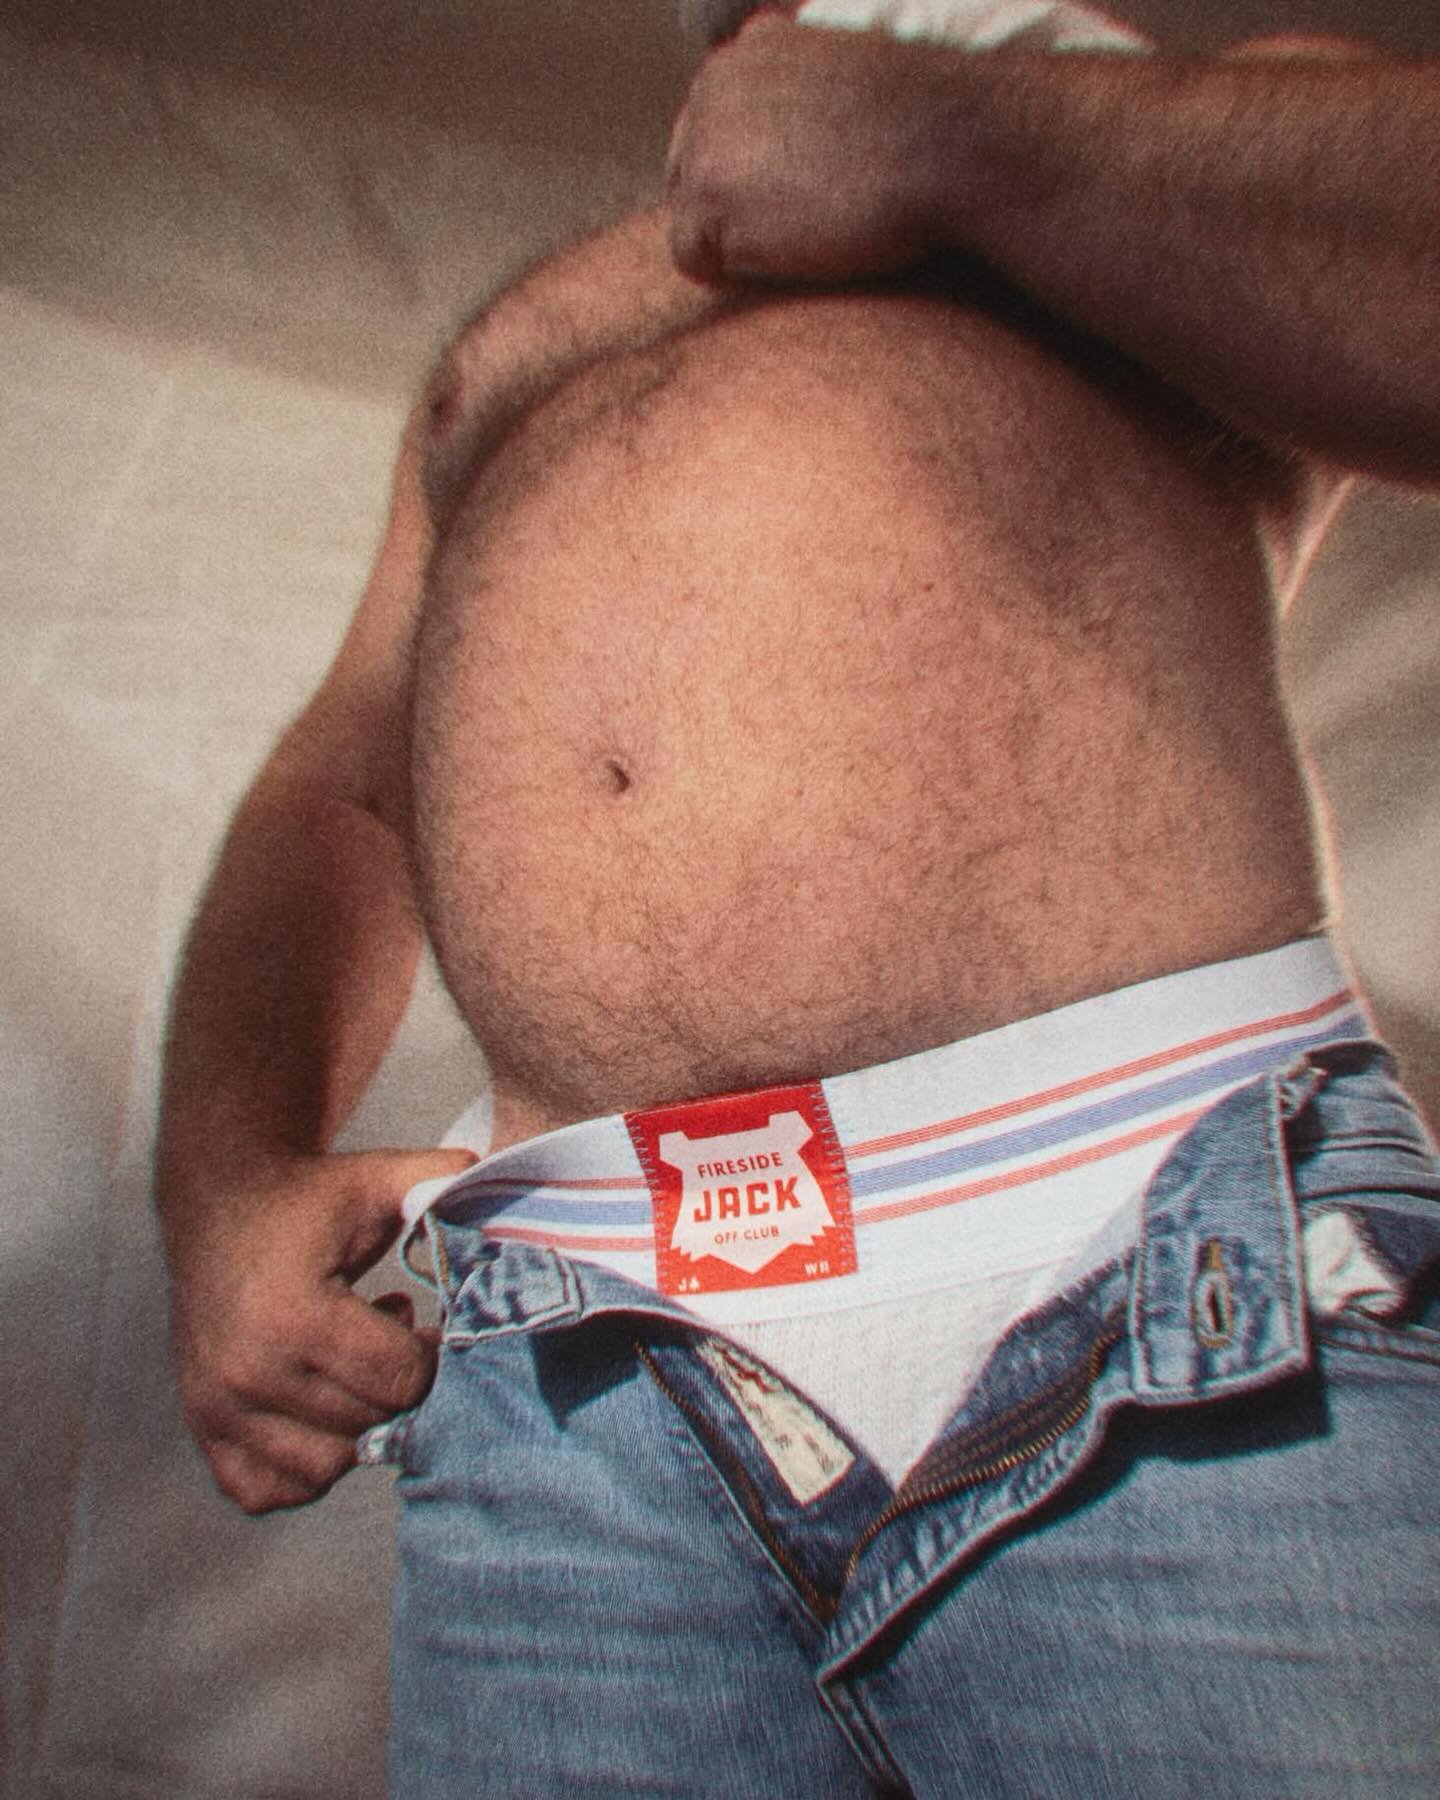 new jockstraps are here. stoked to share them with you. now in the shop.